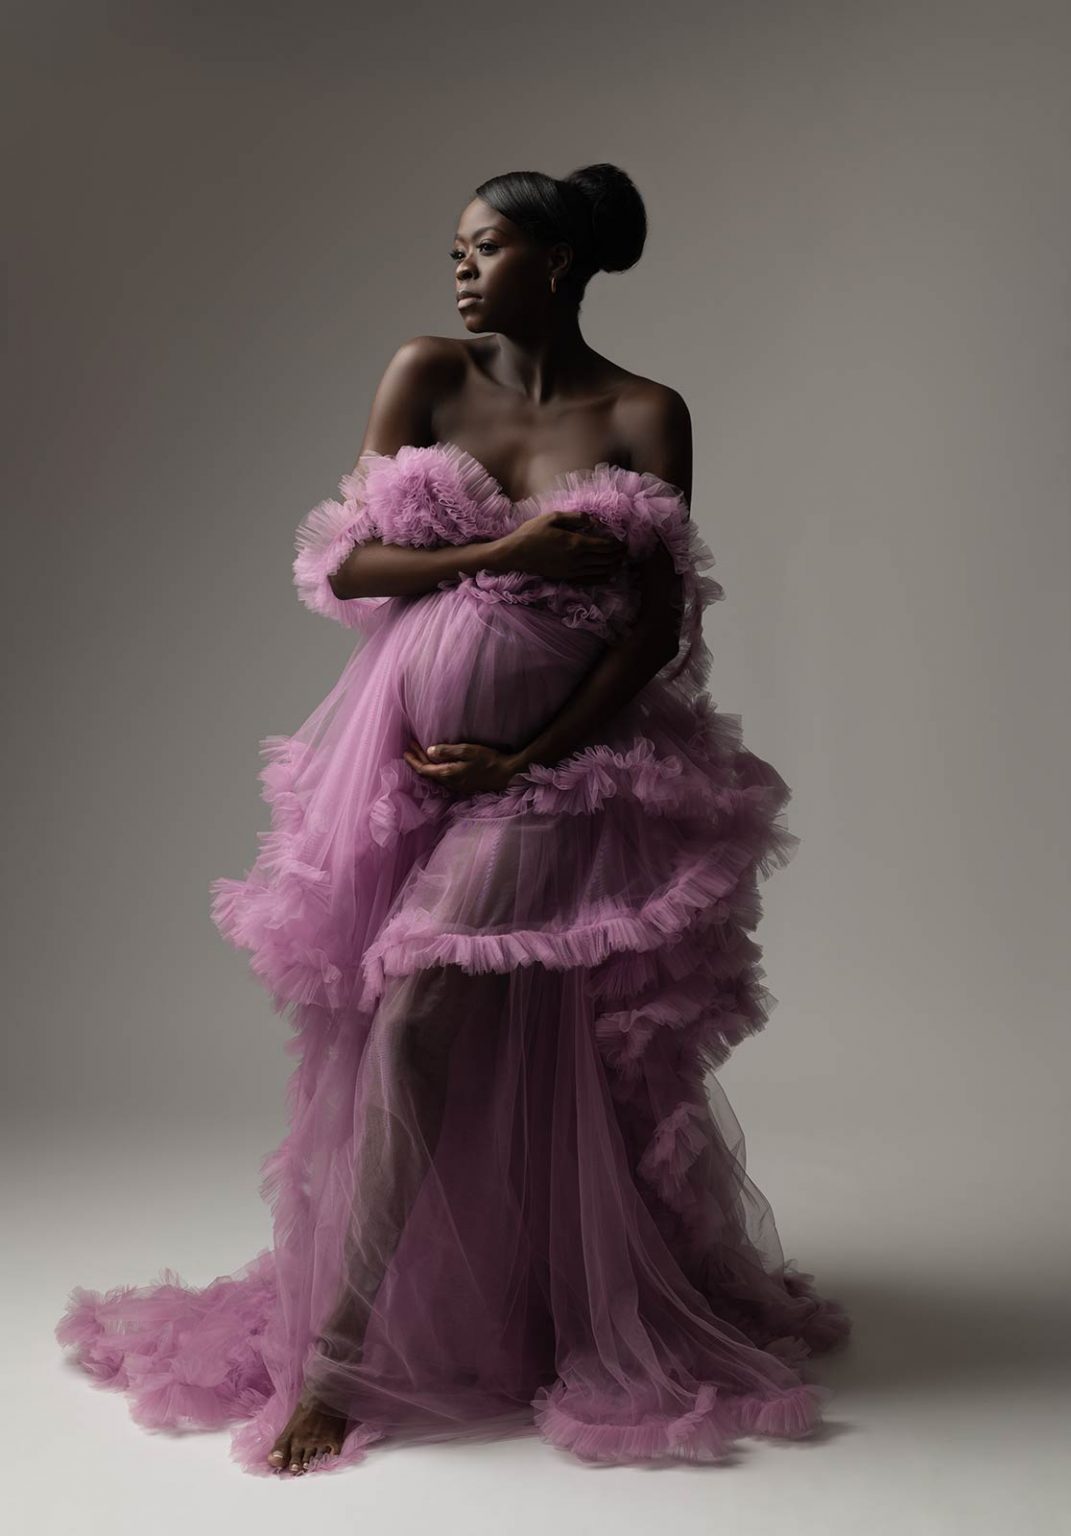 Pregnant woman wearing a purple gown at a maternity photo studio